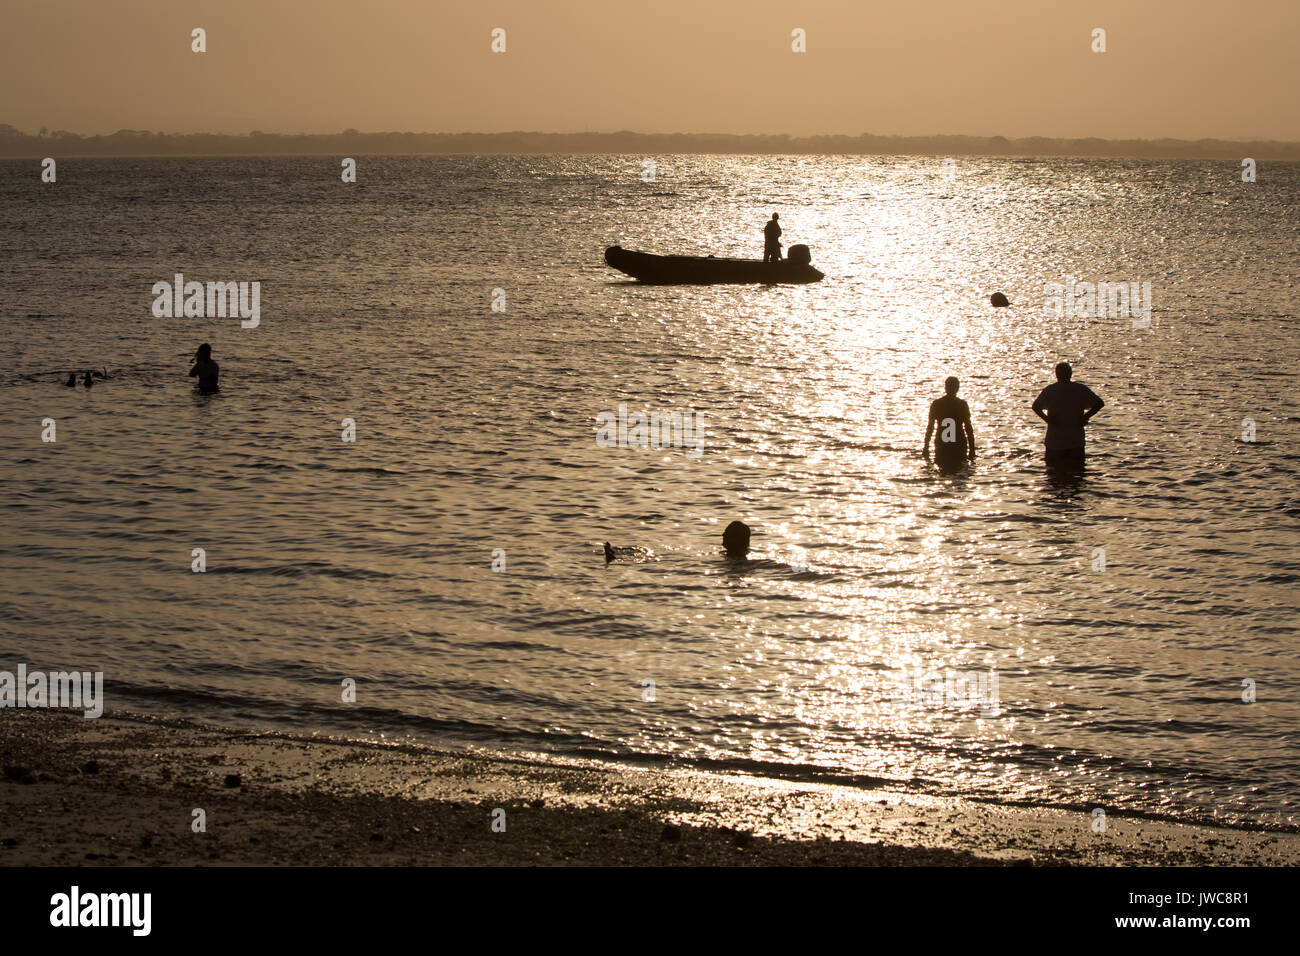 As the sun sets over the waters near Iguana Island,Isla Iguana,a man in an inflatable boat watches travelers stand in the water. Stock Photo